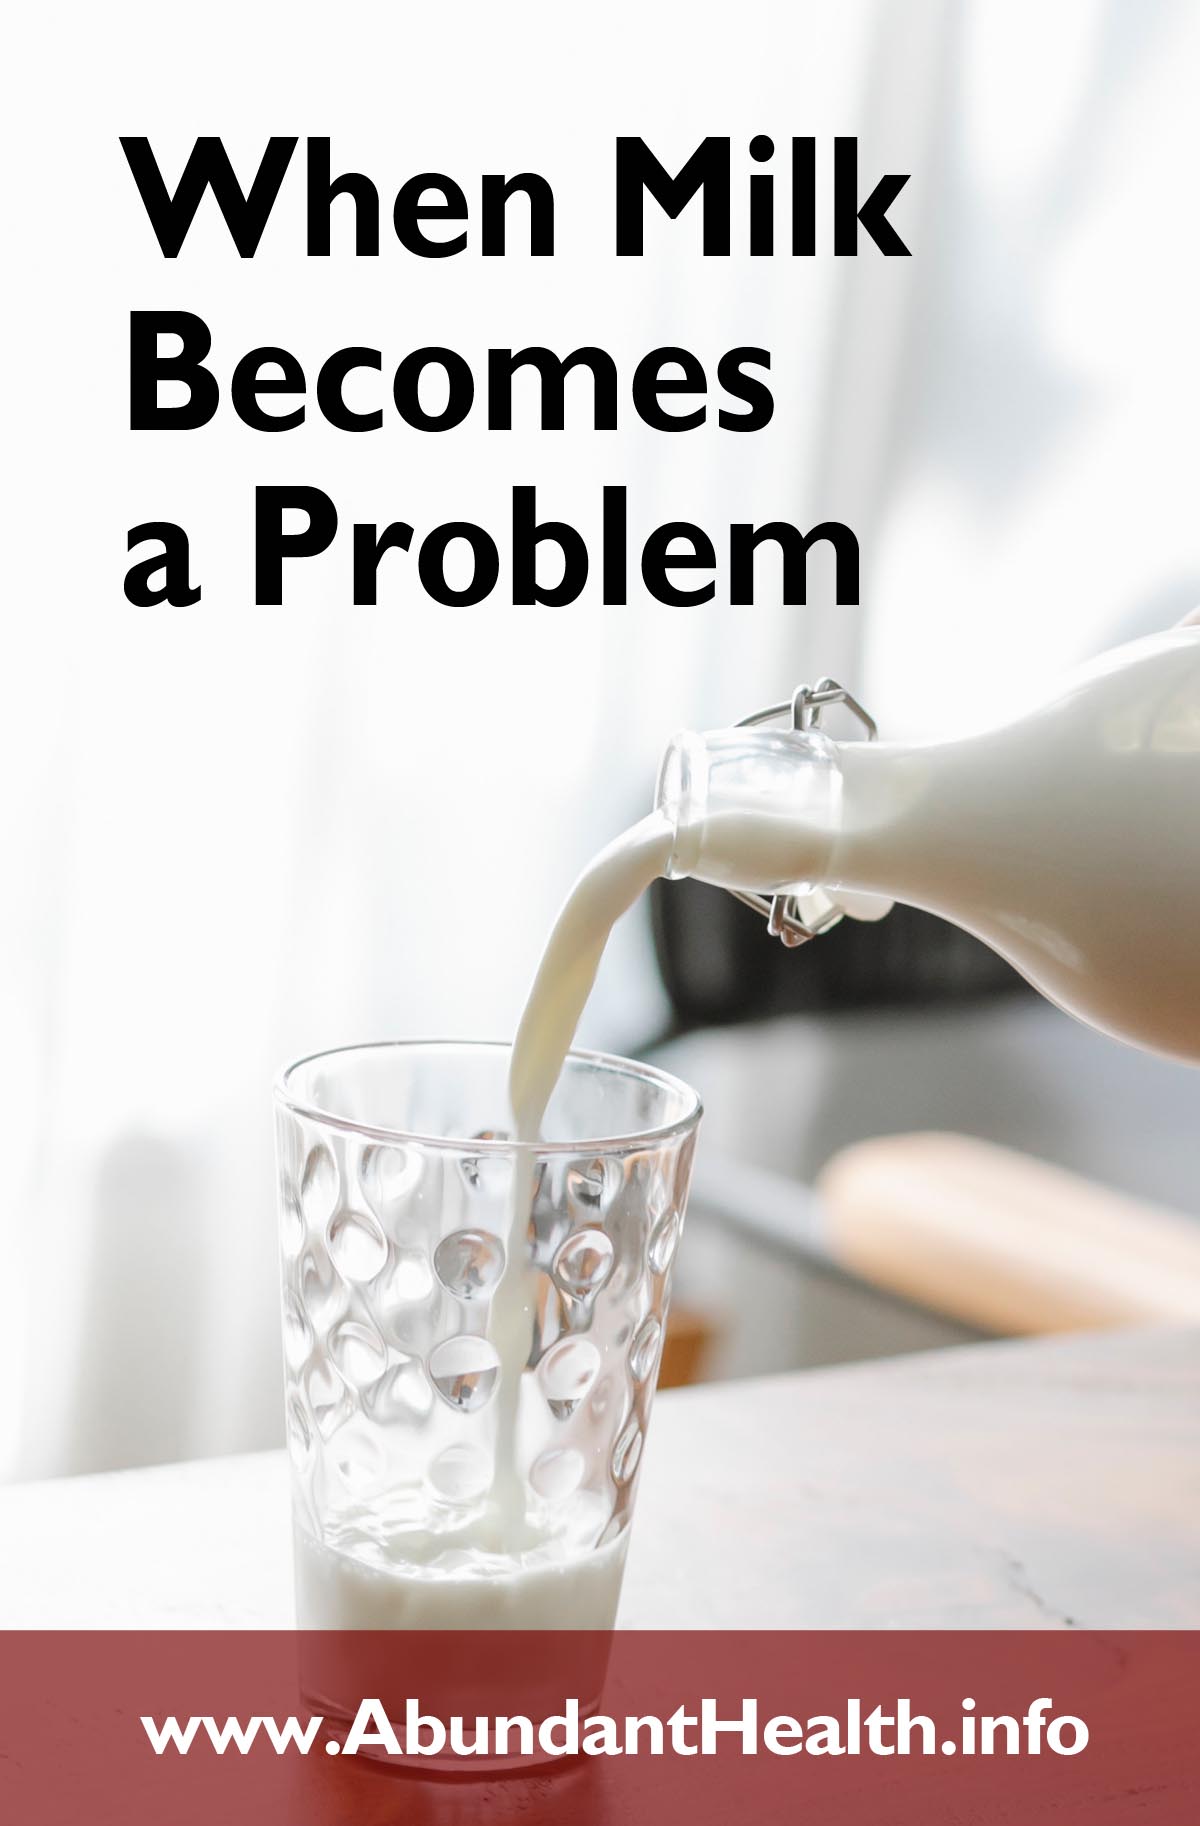 When Milk Becomes a Problem